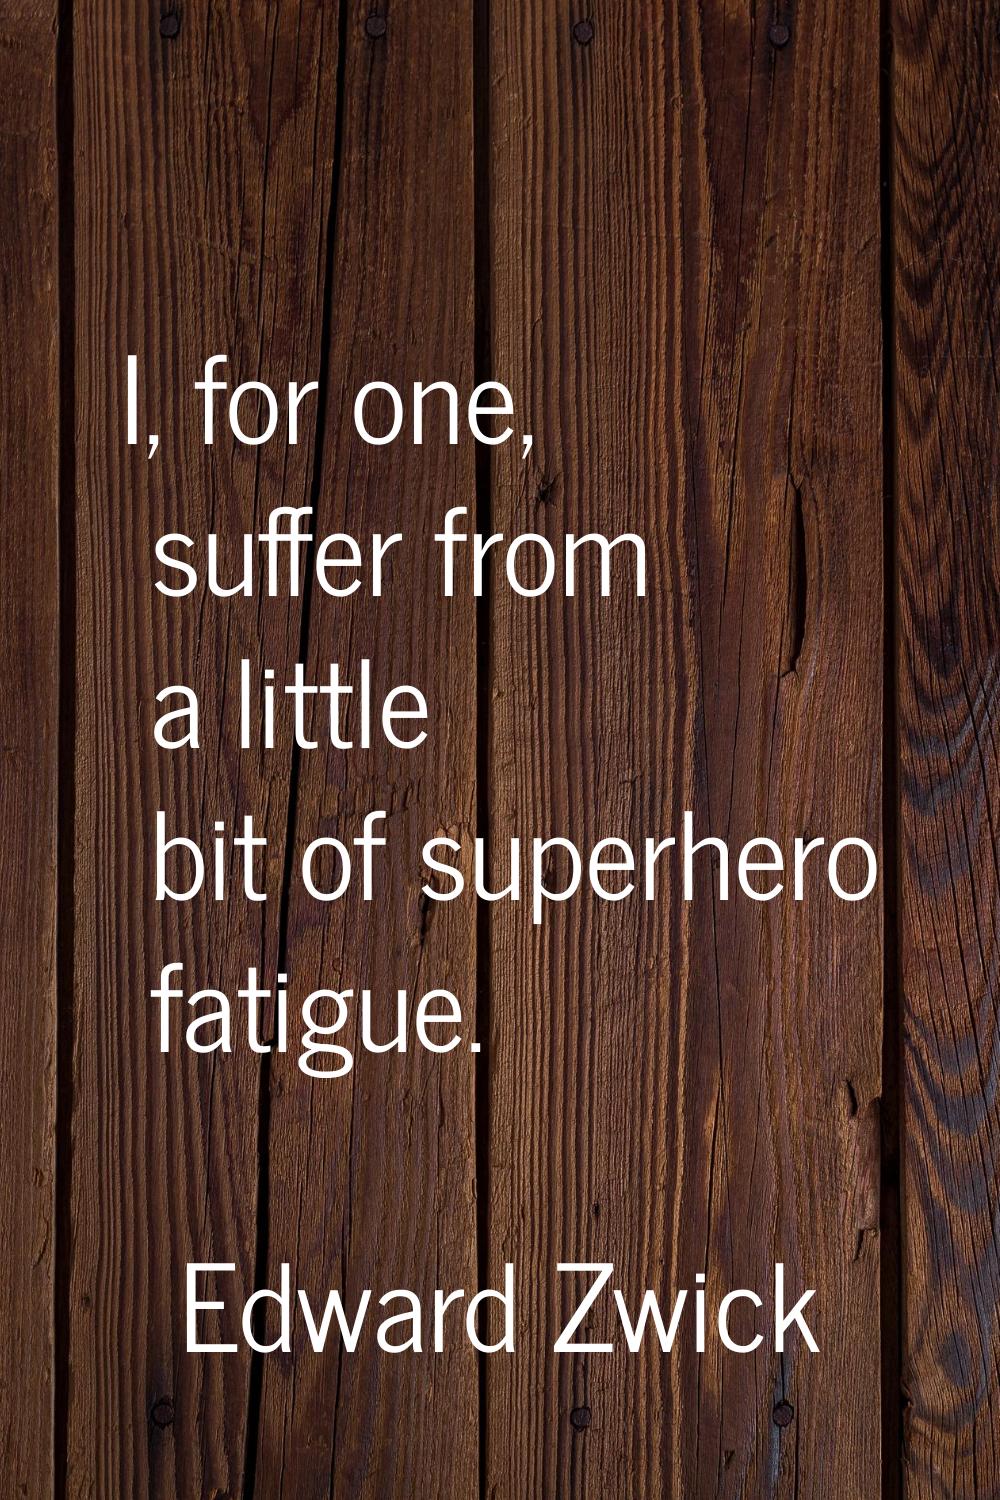 I, for one, suffer from a little bit of superhero fatigue.